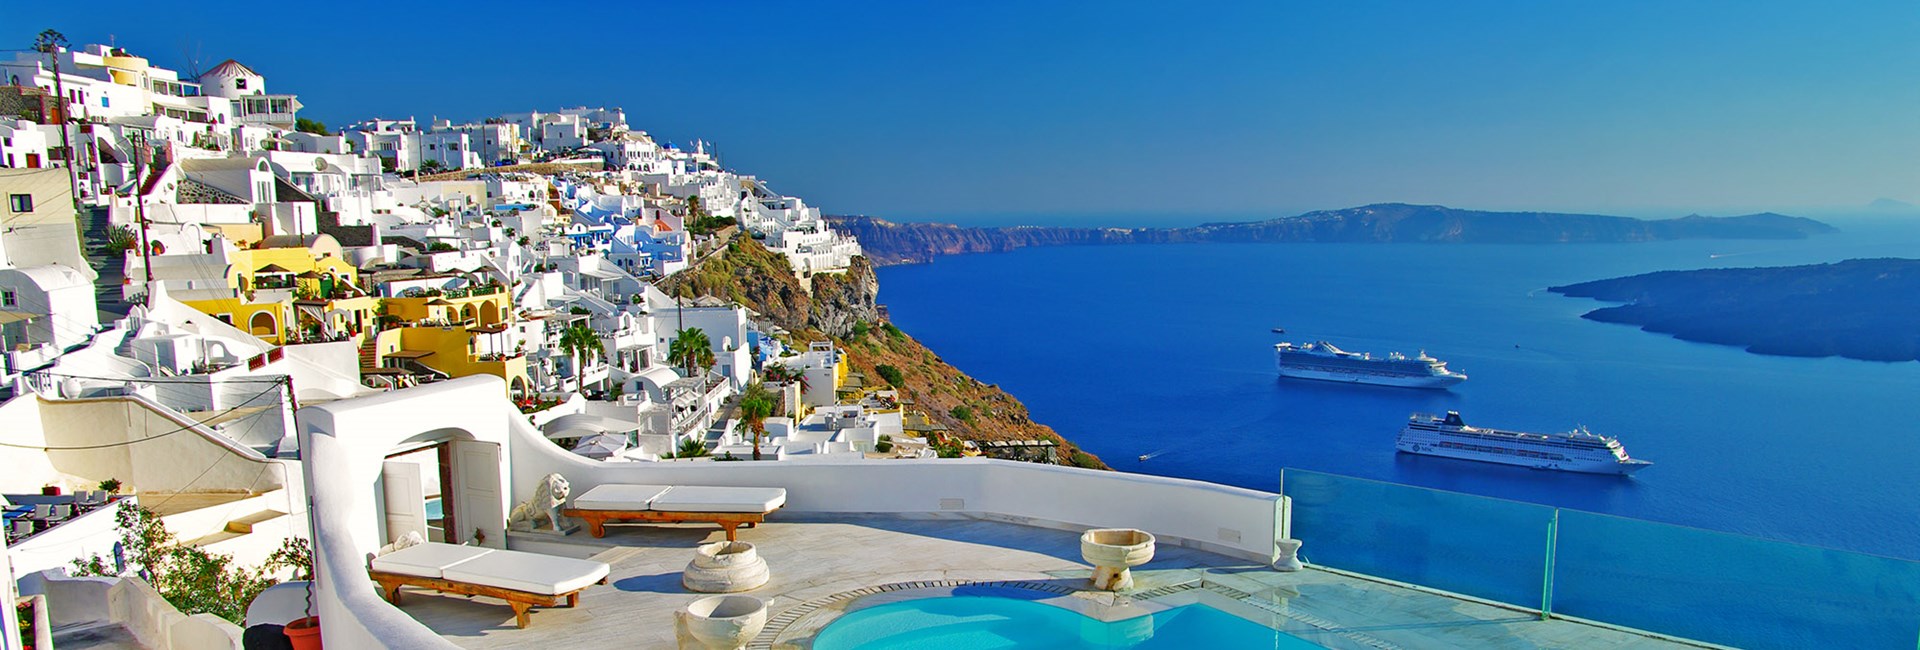 Top european holiday destination with accommodation, pool, blue sea and cobalt sky.